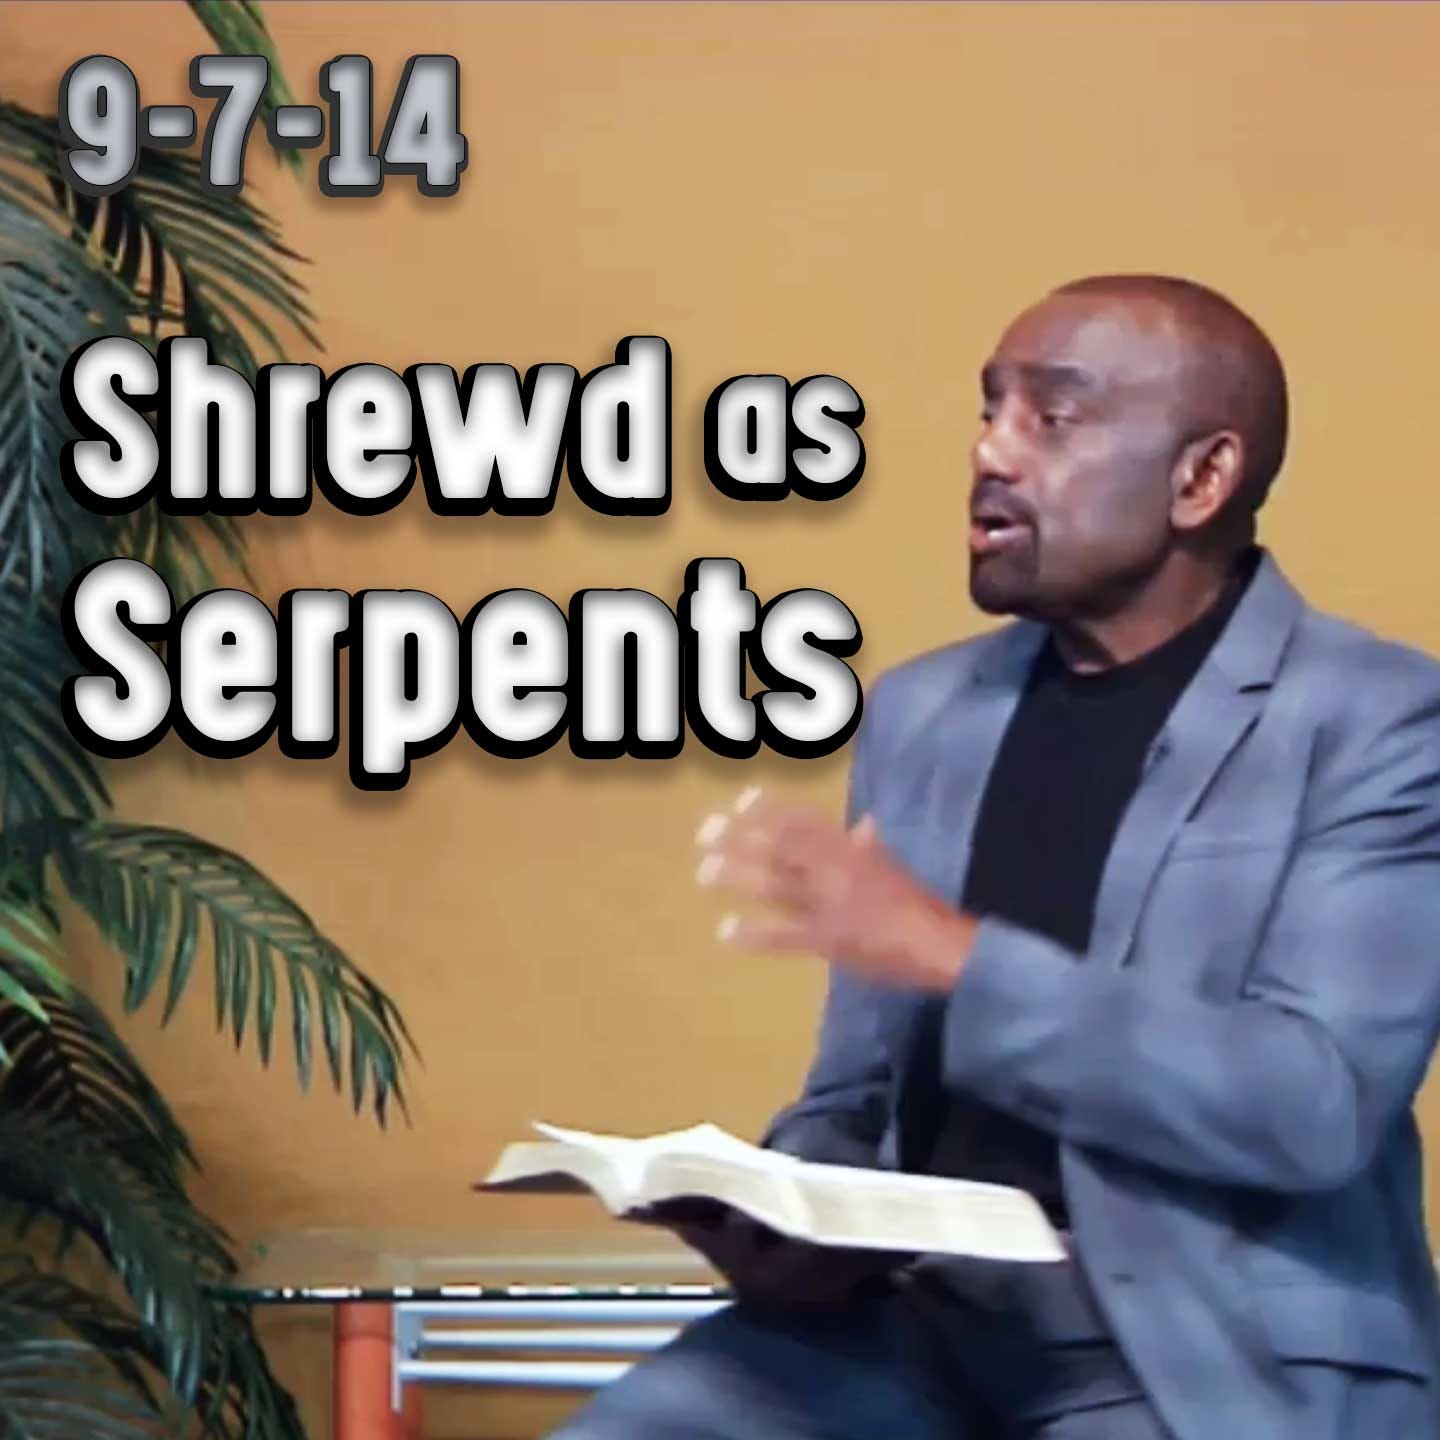 Are Christians Winning the Spiritual War? | Archive 9/7/14